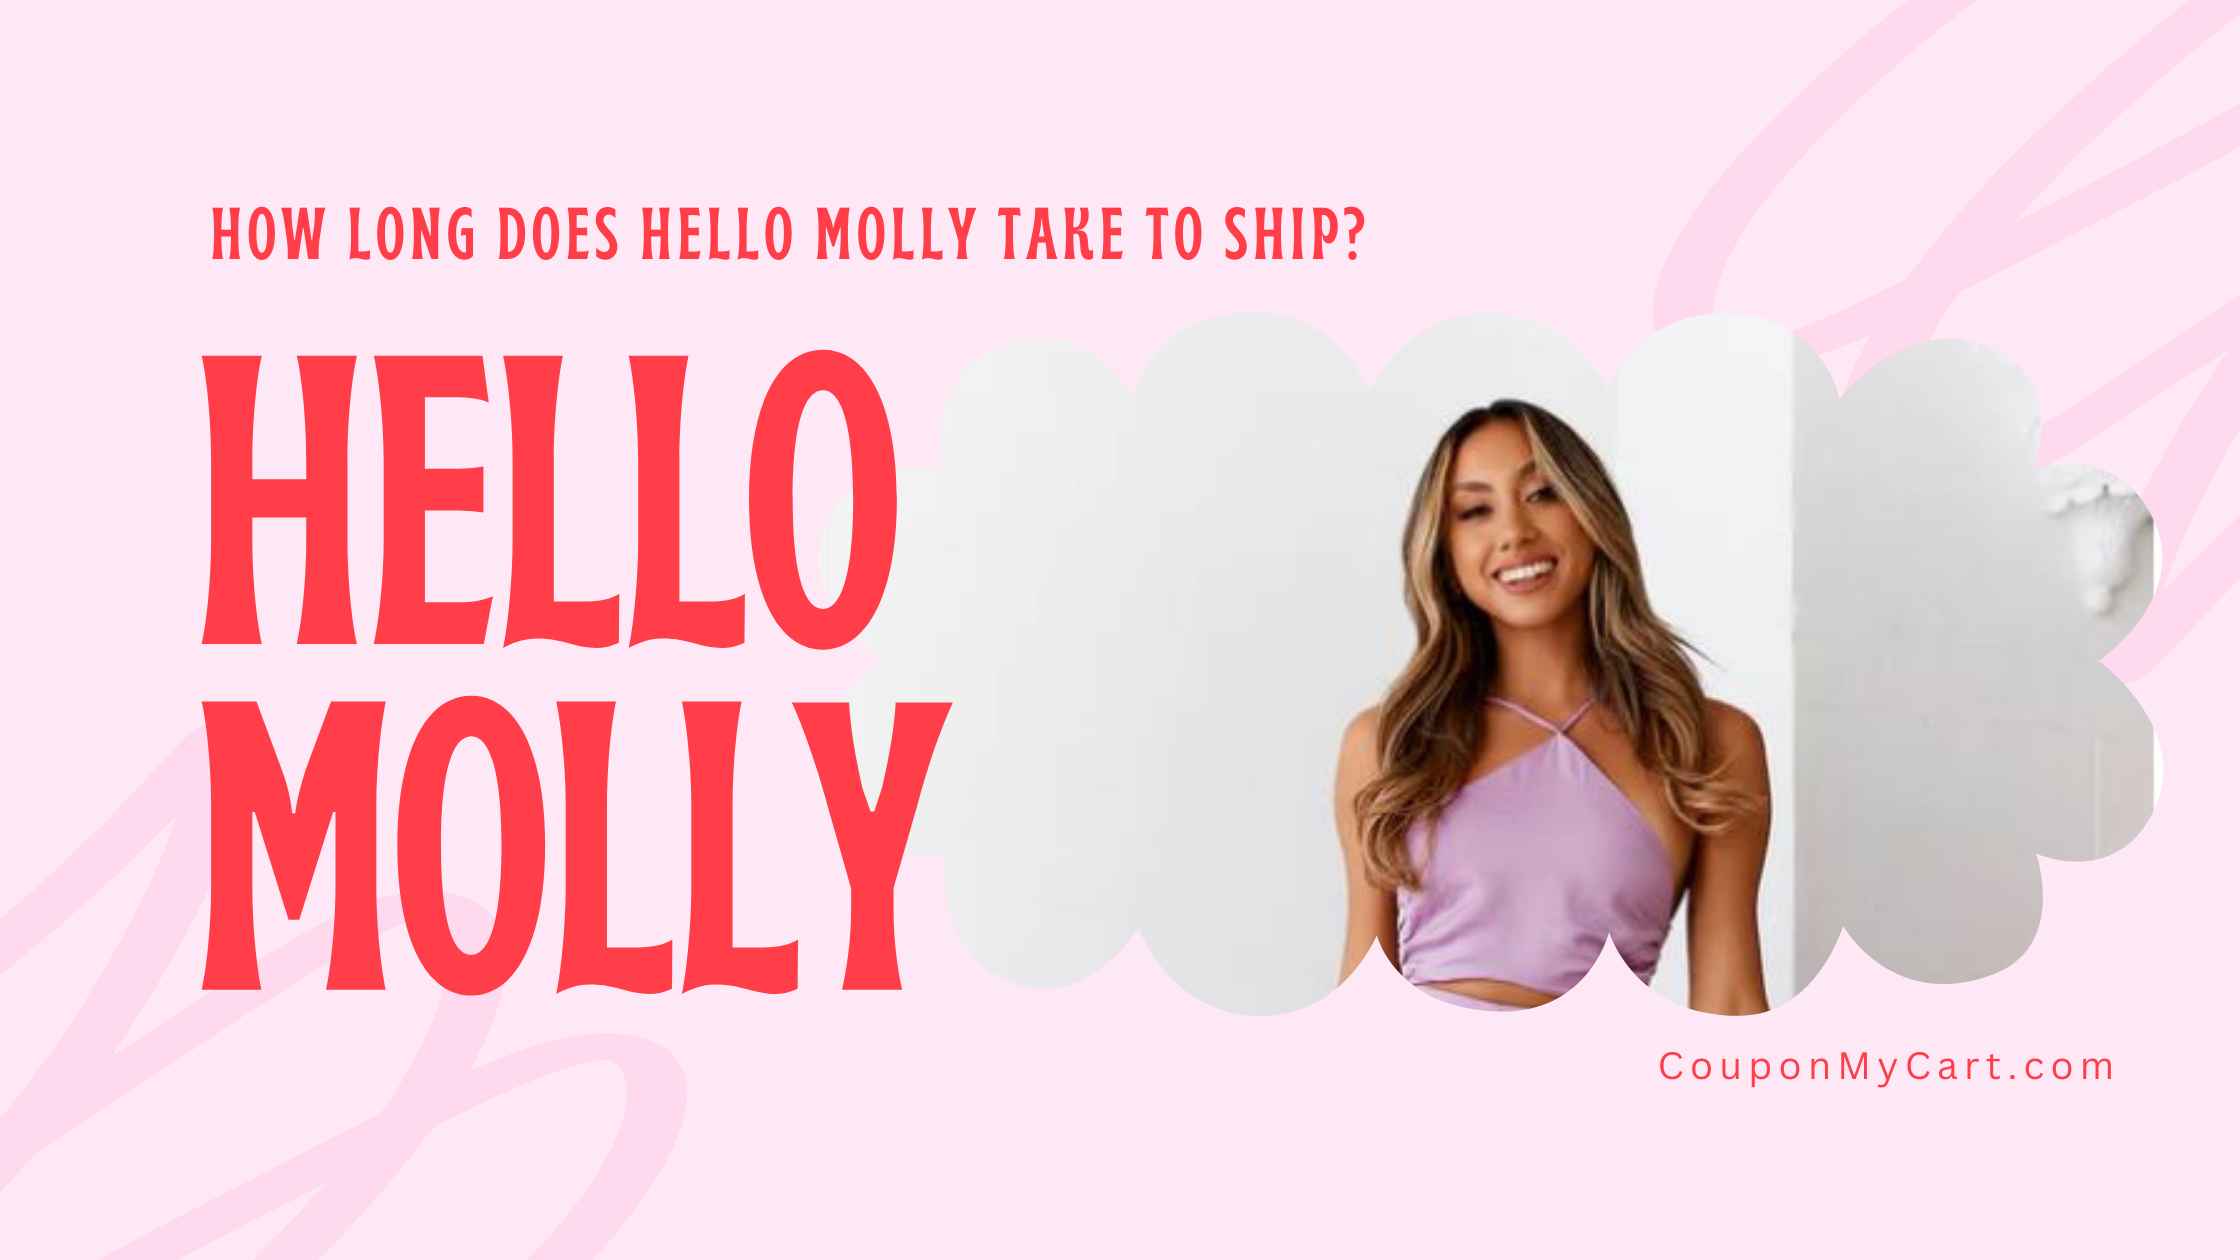 hello molly wallpaper with a girl picture wearing hello molly dress